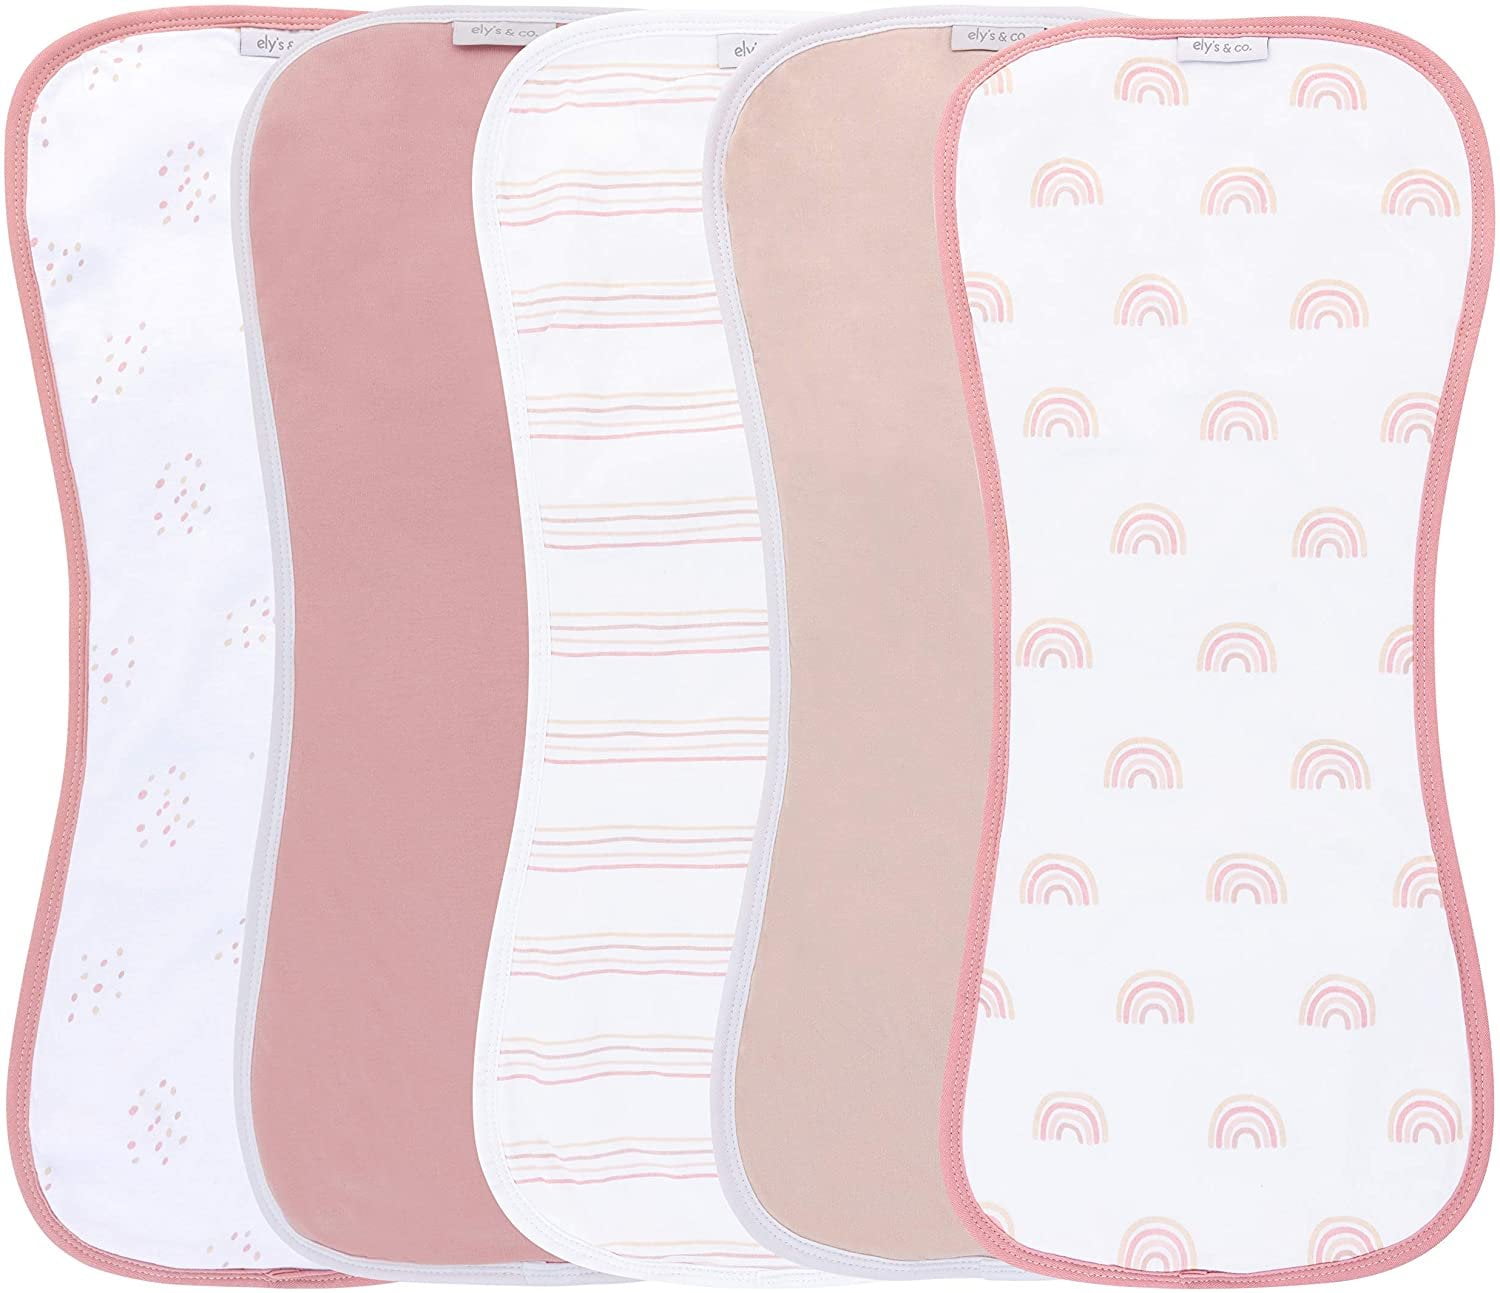 Double Layer Cotton Flannel New born baby absorment burp Cloth Diaper Wipes 